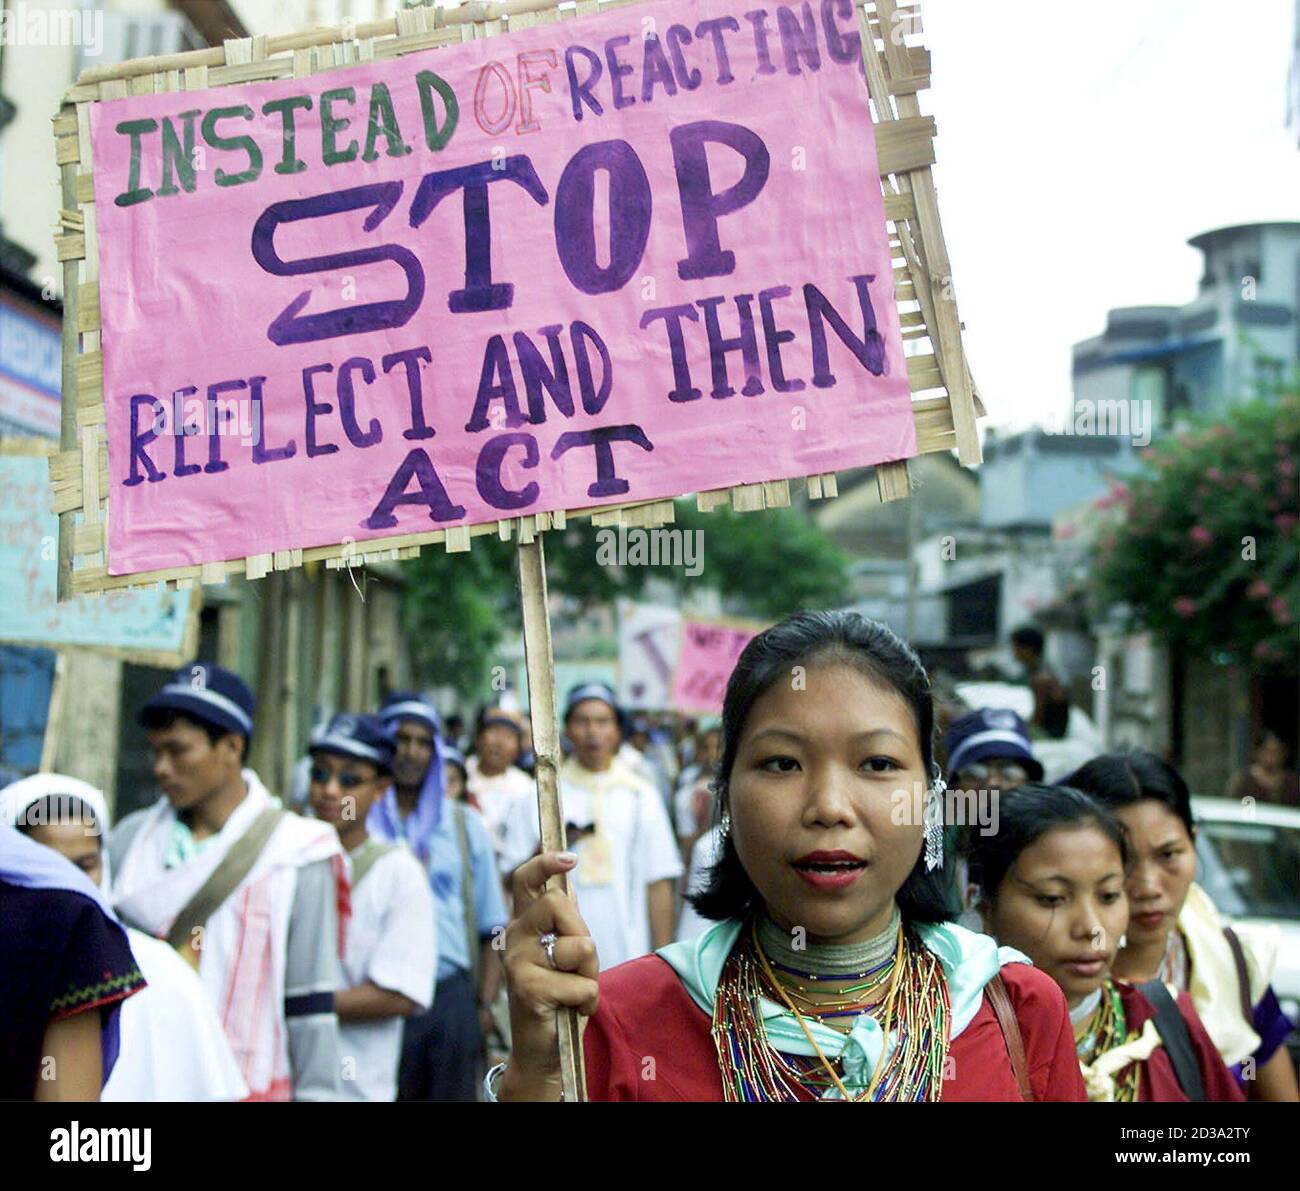 A Naga tribal woman from India's northeast region holds a placard during a rally in the eastern Indian city of Calcutta October 30, 2001. About 5,000 Indian youth took part in the rally organised by a Christian organisation to highlight the problems of youth worldwide including drug abuse and violence. REUTERS/Jayanta Shaw  JS/DL Stock Photo